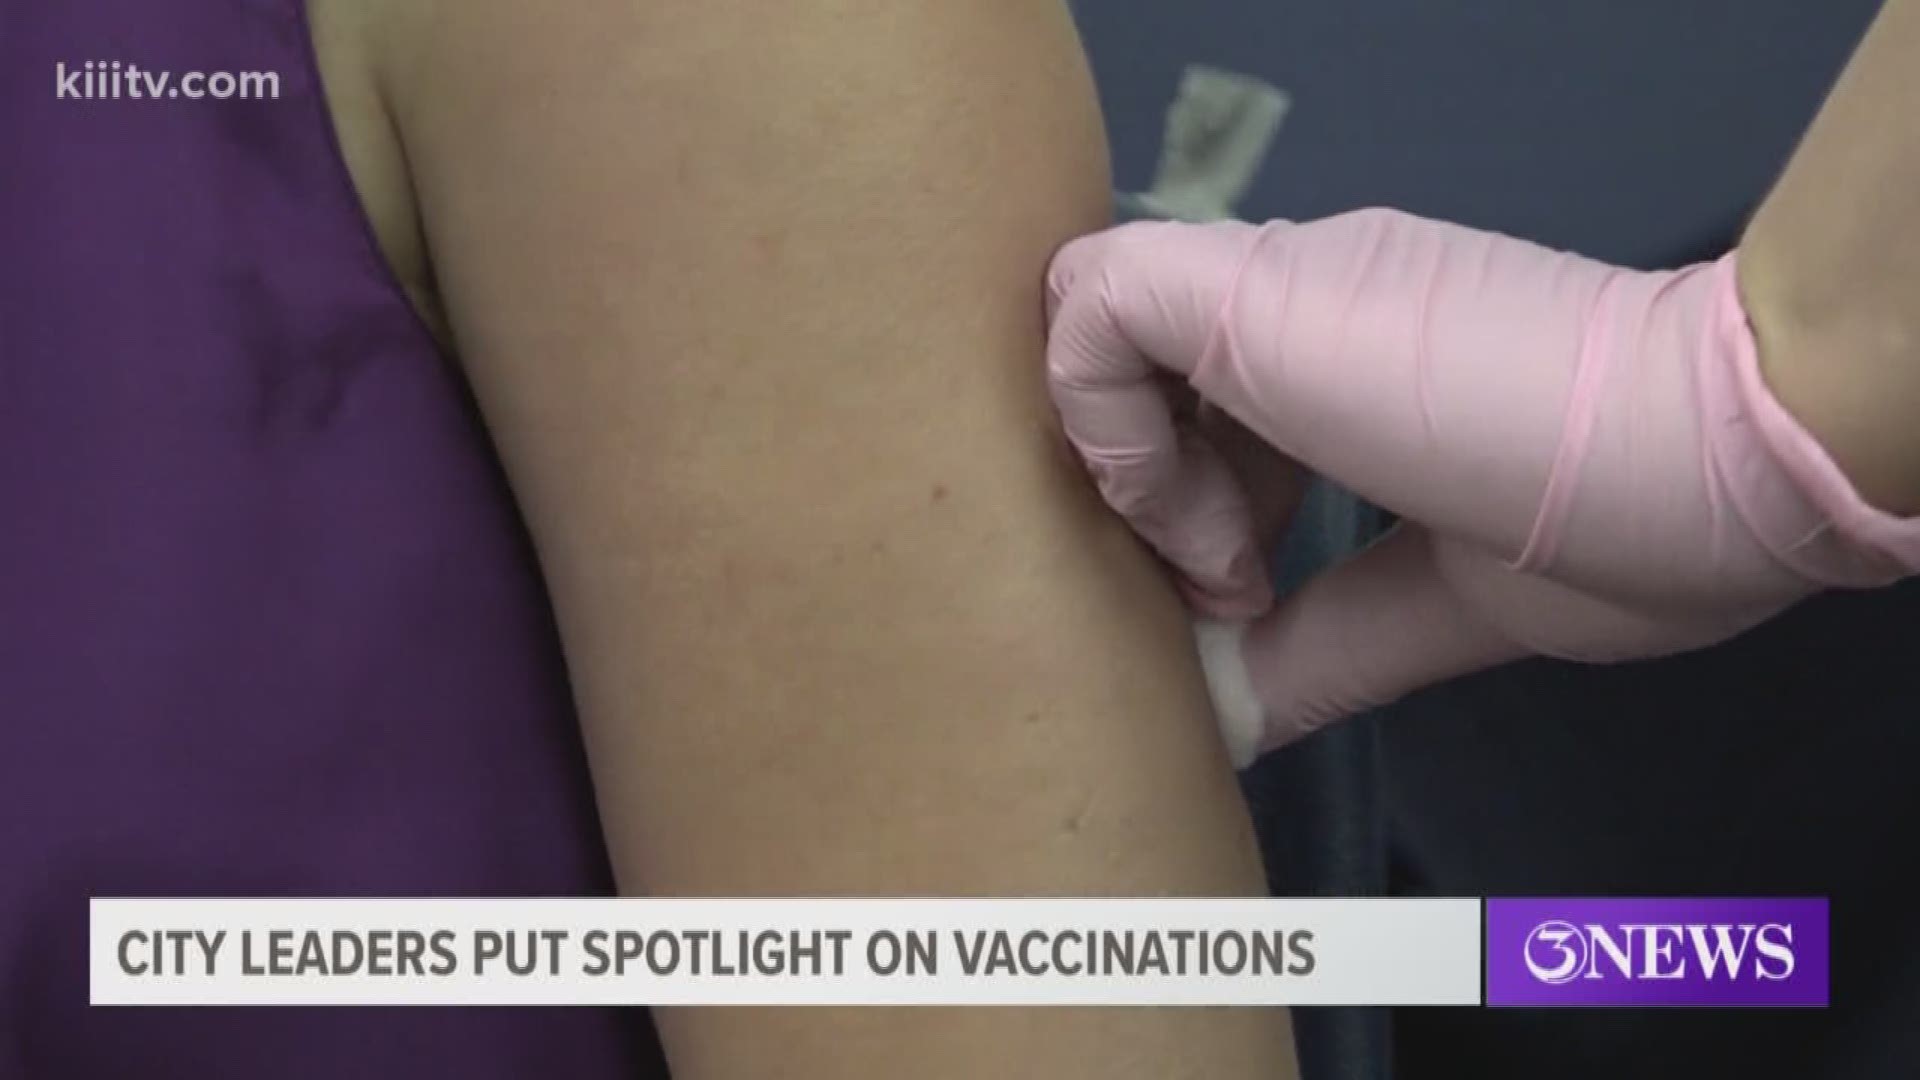 The Nueces County Health District teamed up with city leaders Wednesday in an effort to raise awarness of vaccinations and why it is important to be aware of dangerous illnesses.